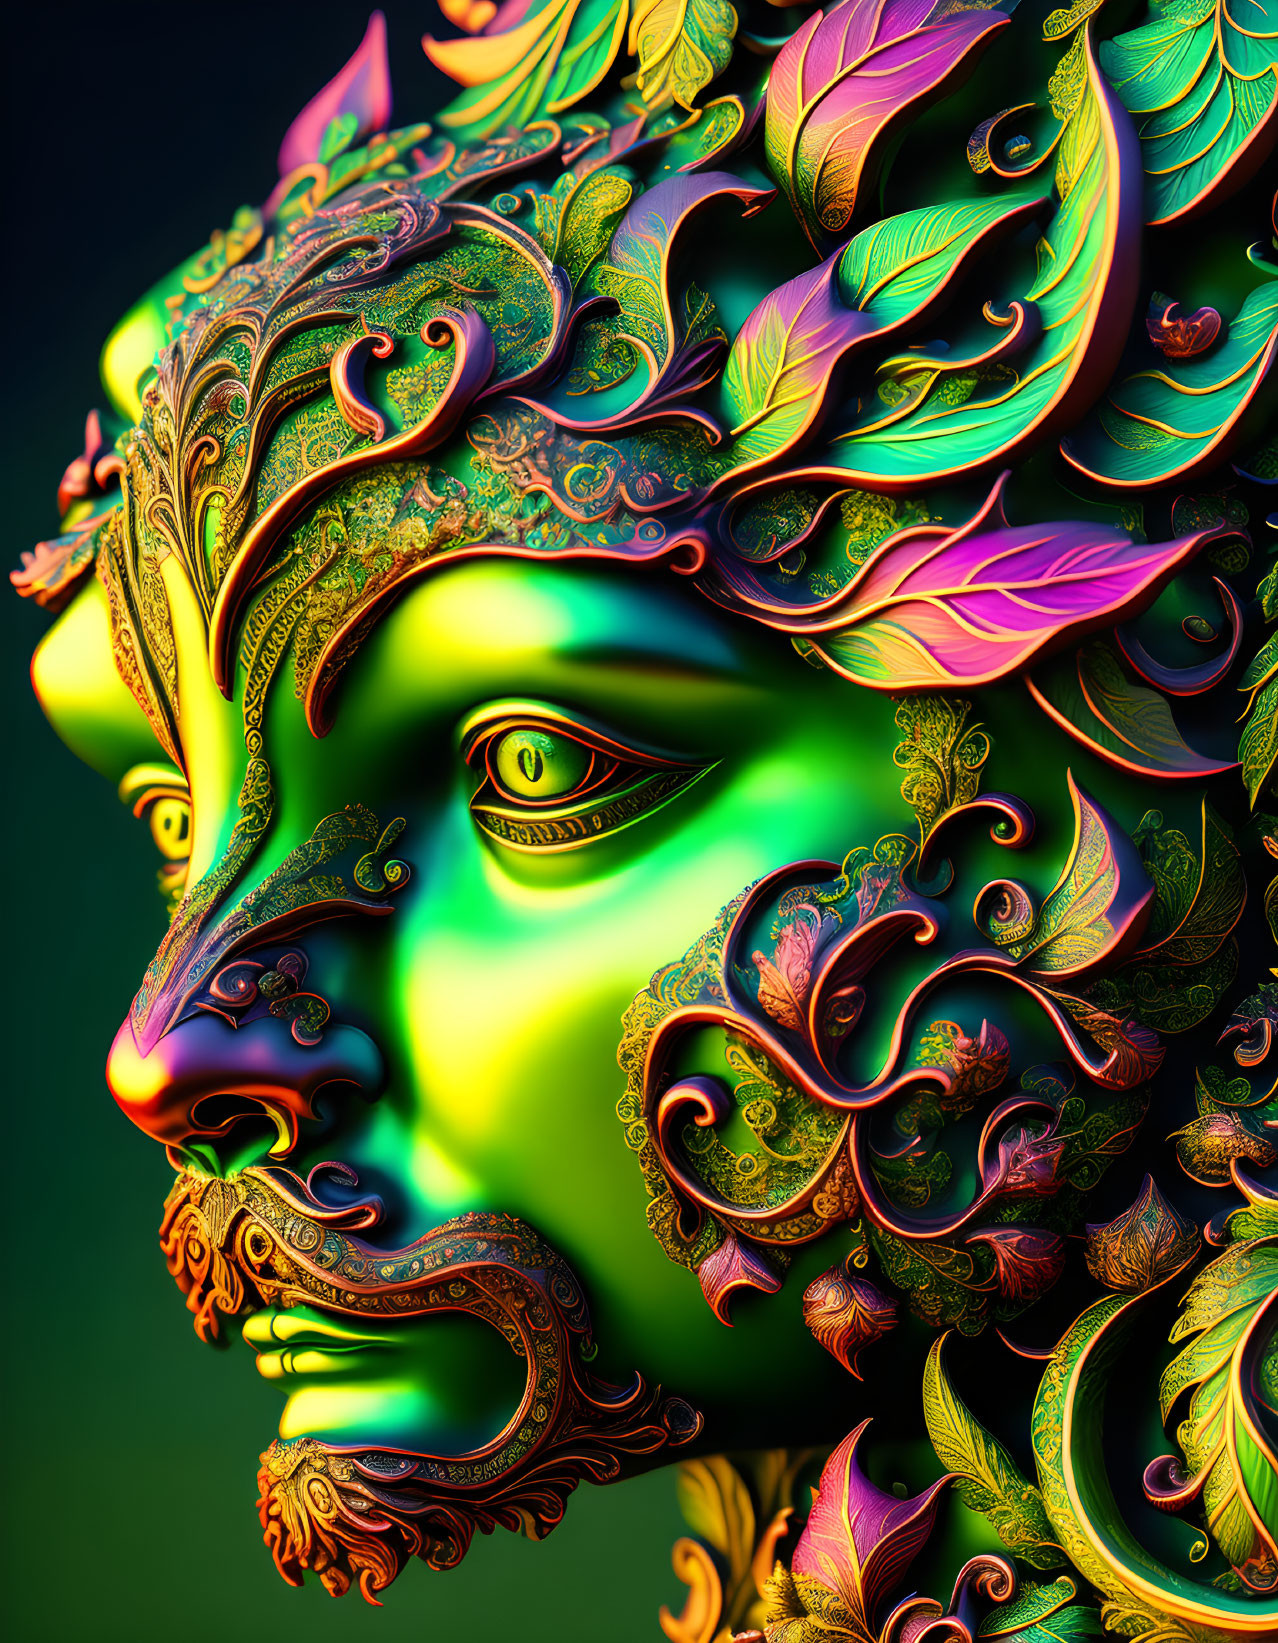 Colorful digital portrait with leaf-like patterns in green, gold, and purple.